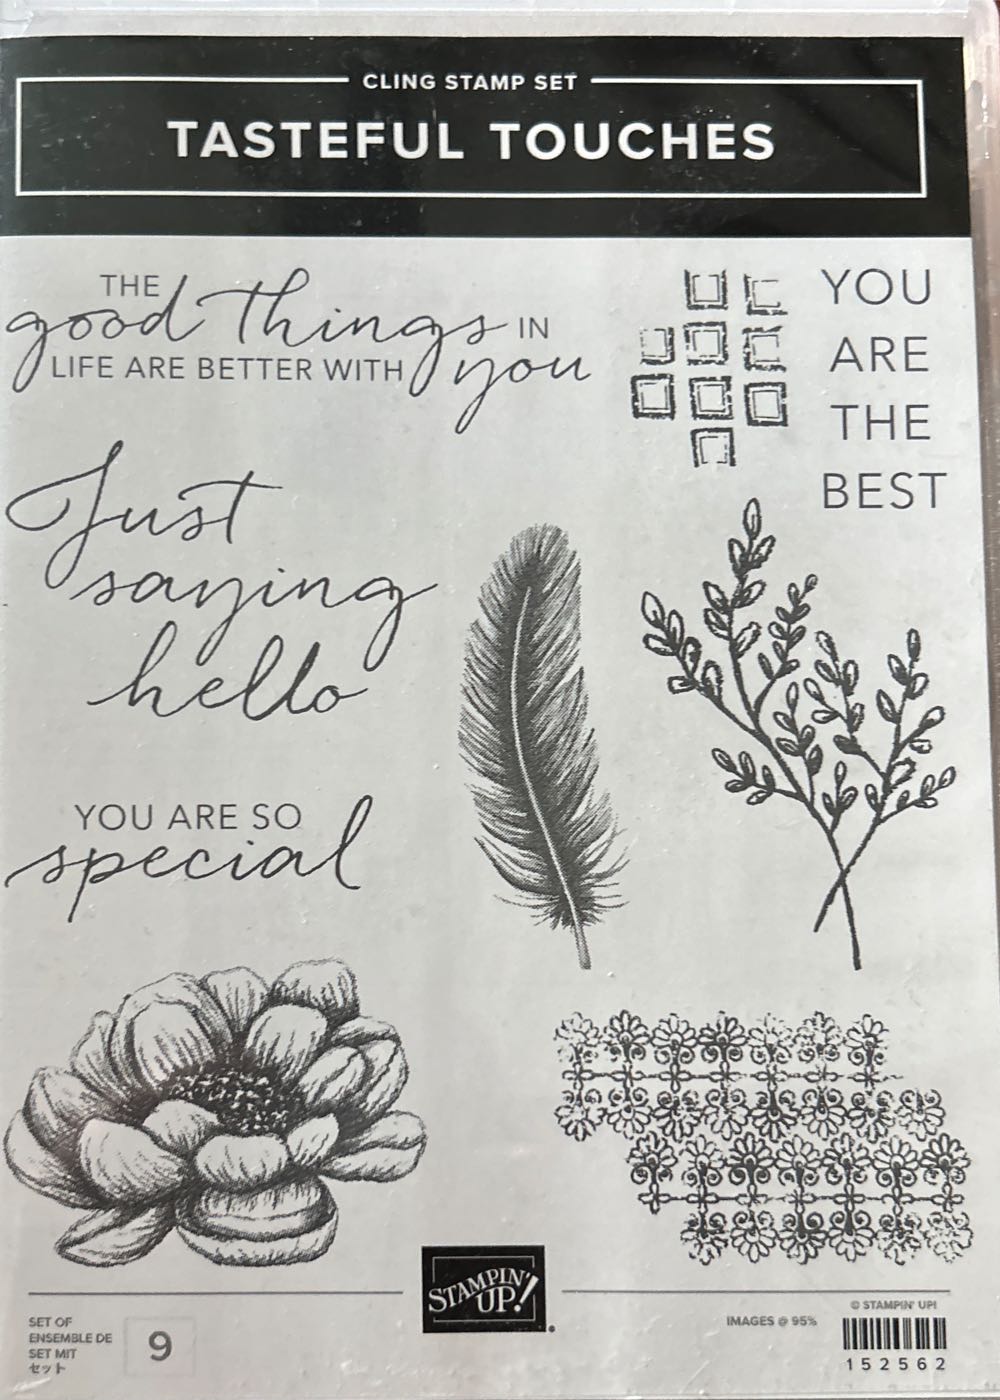 Tasteful Touches - Stampin’ Up! art collectible [Barcode 152562] - Main Image 1